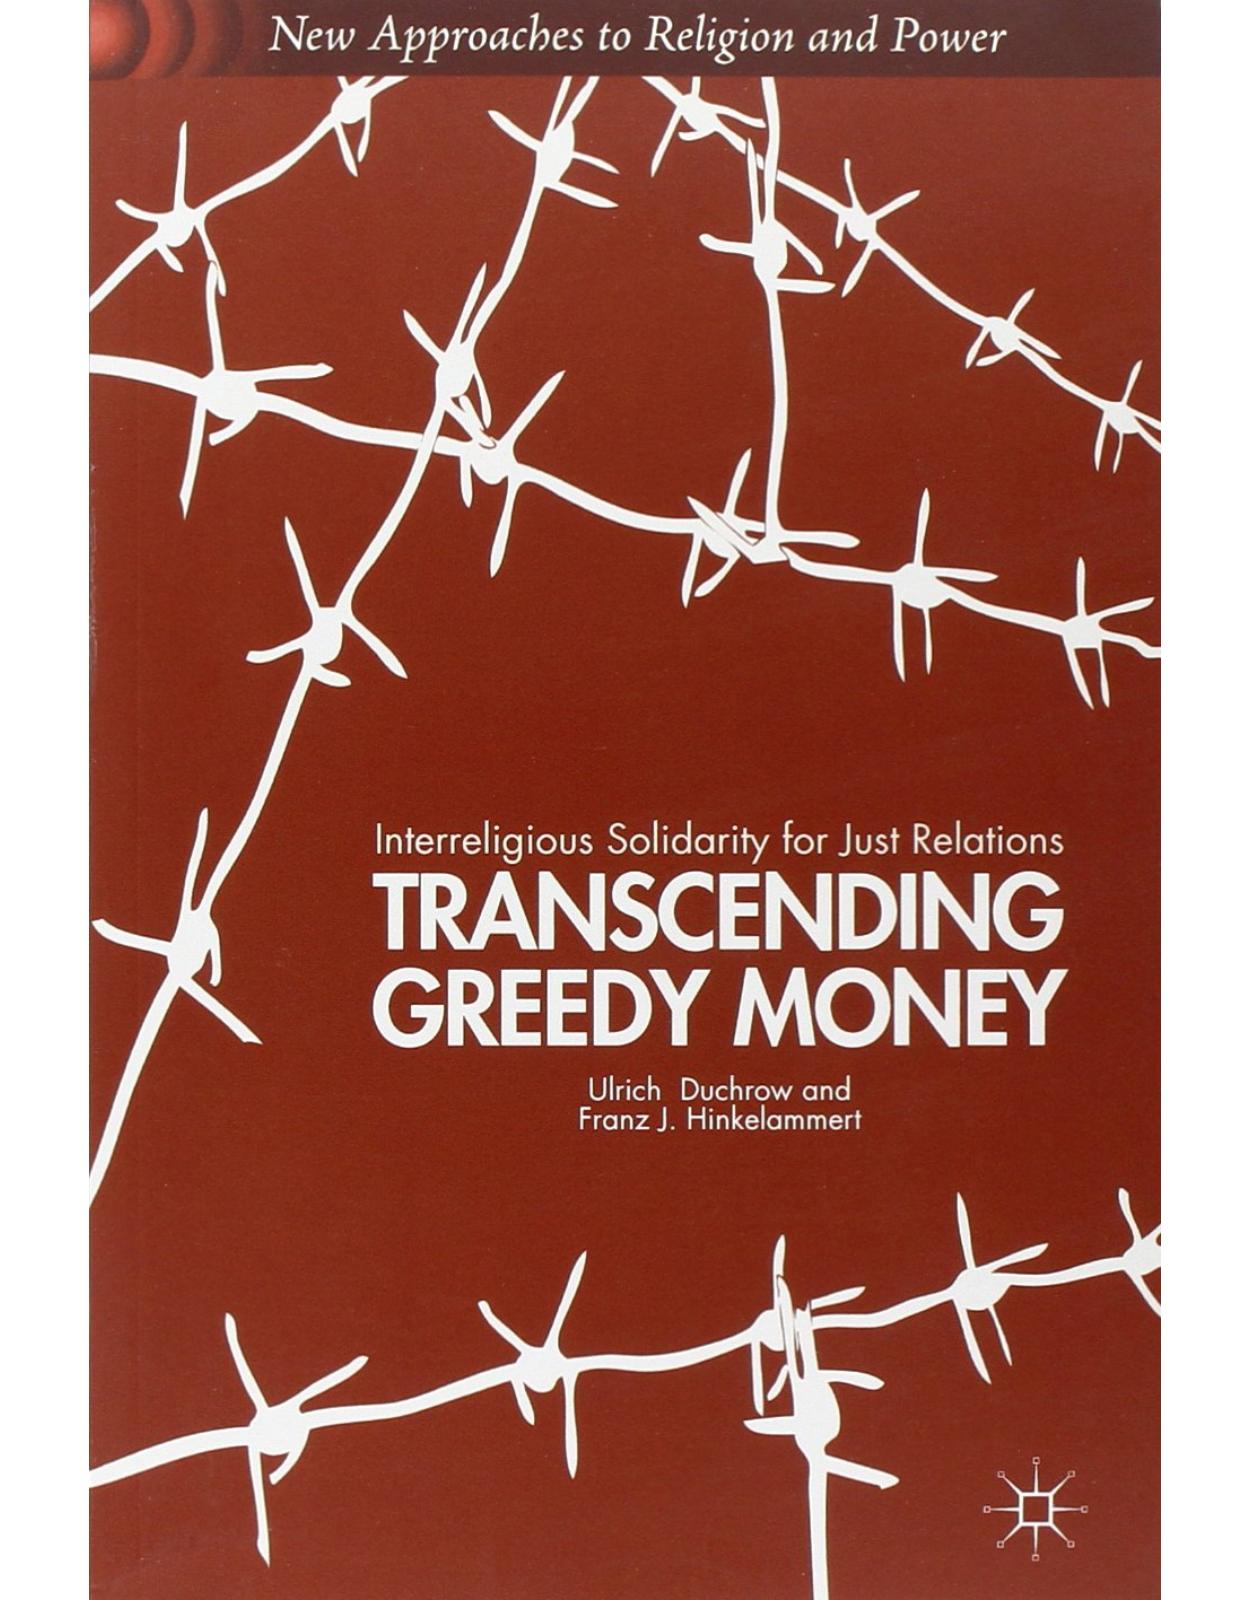 Transcending Greedy Money: Interreligious Solidarity for Just Relations (New Approaches to Religion and Power)